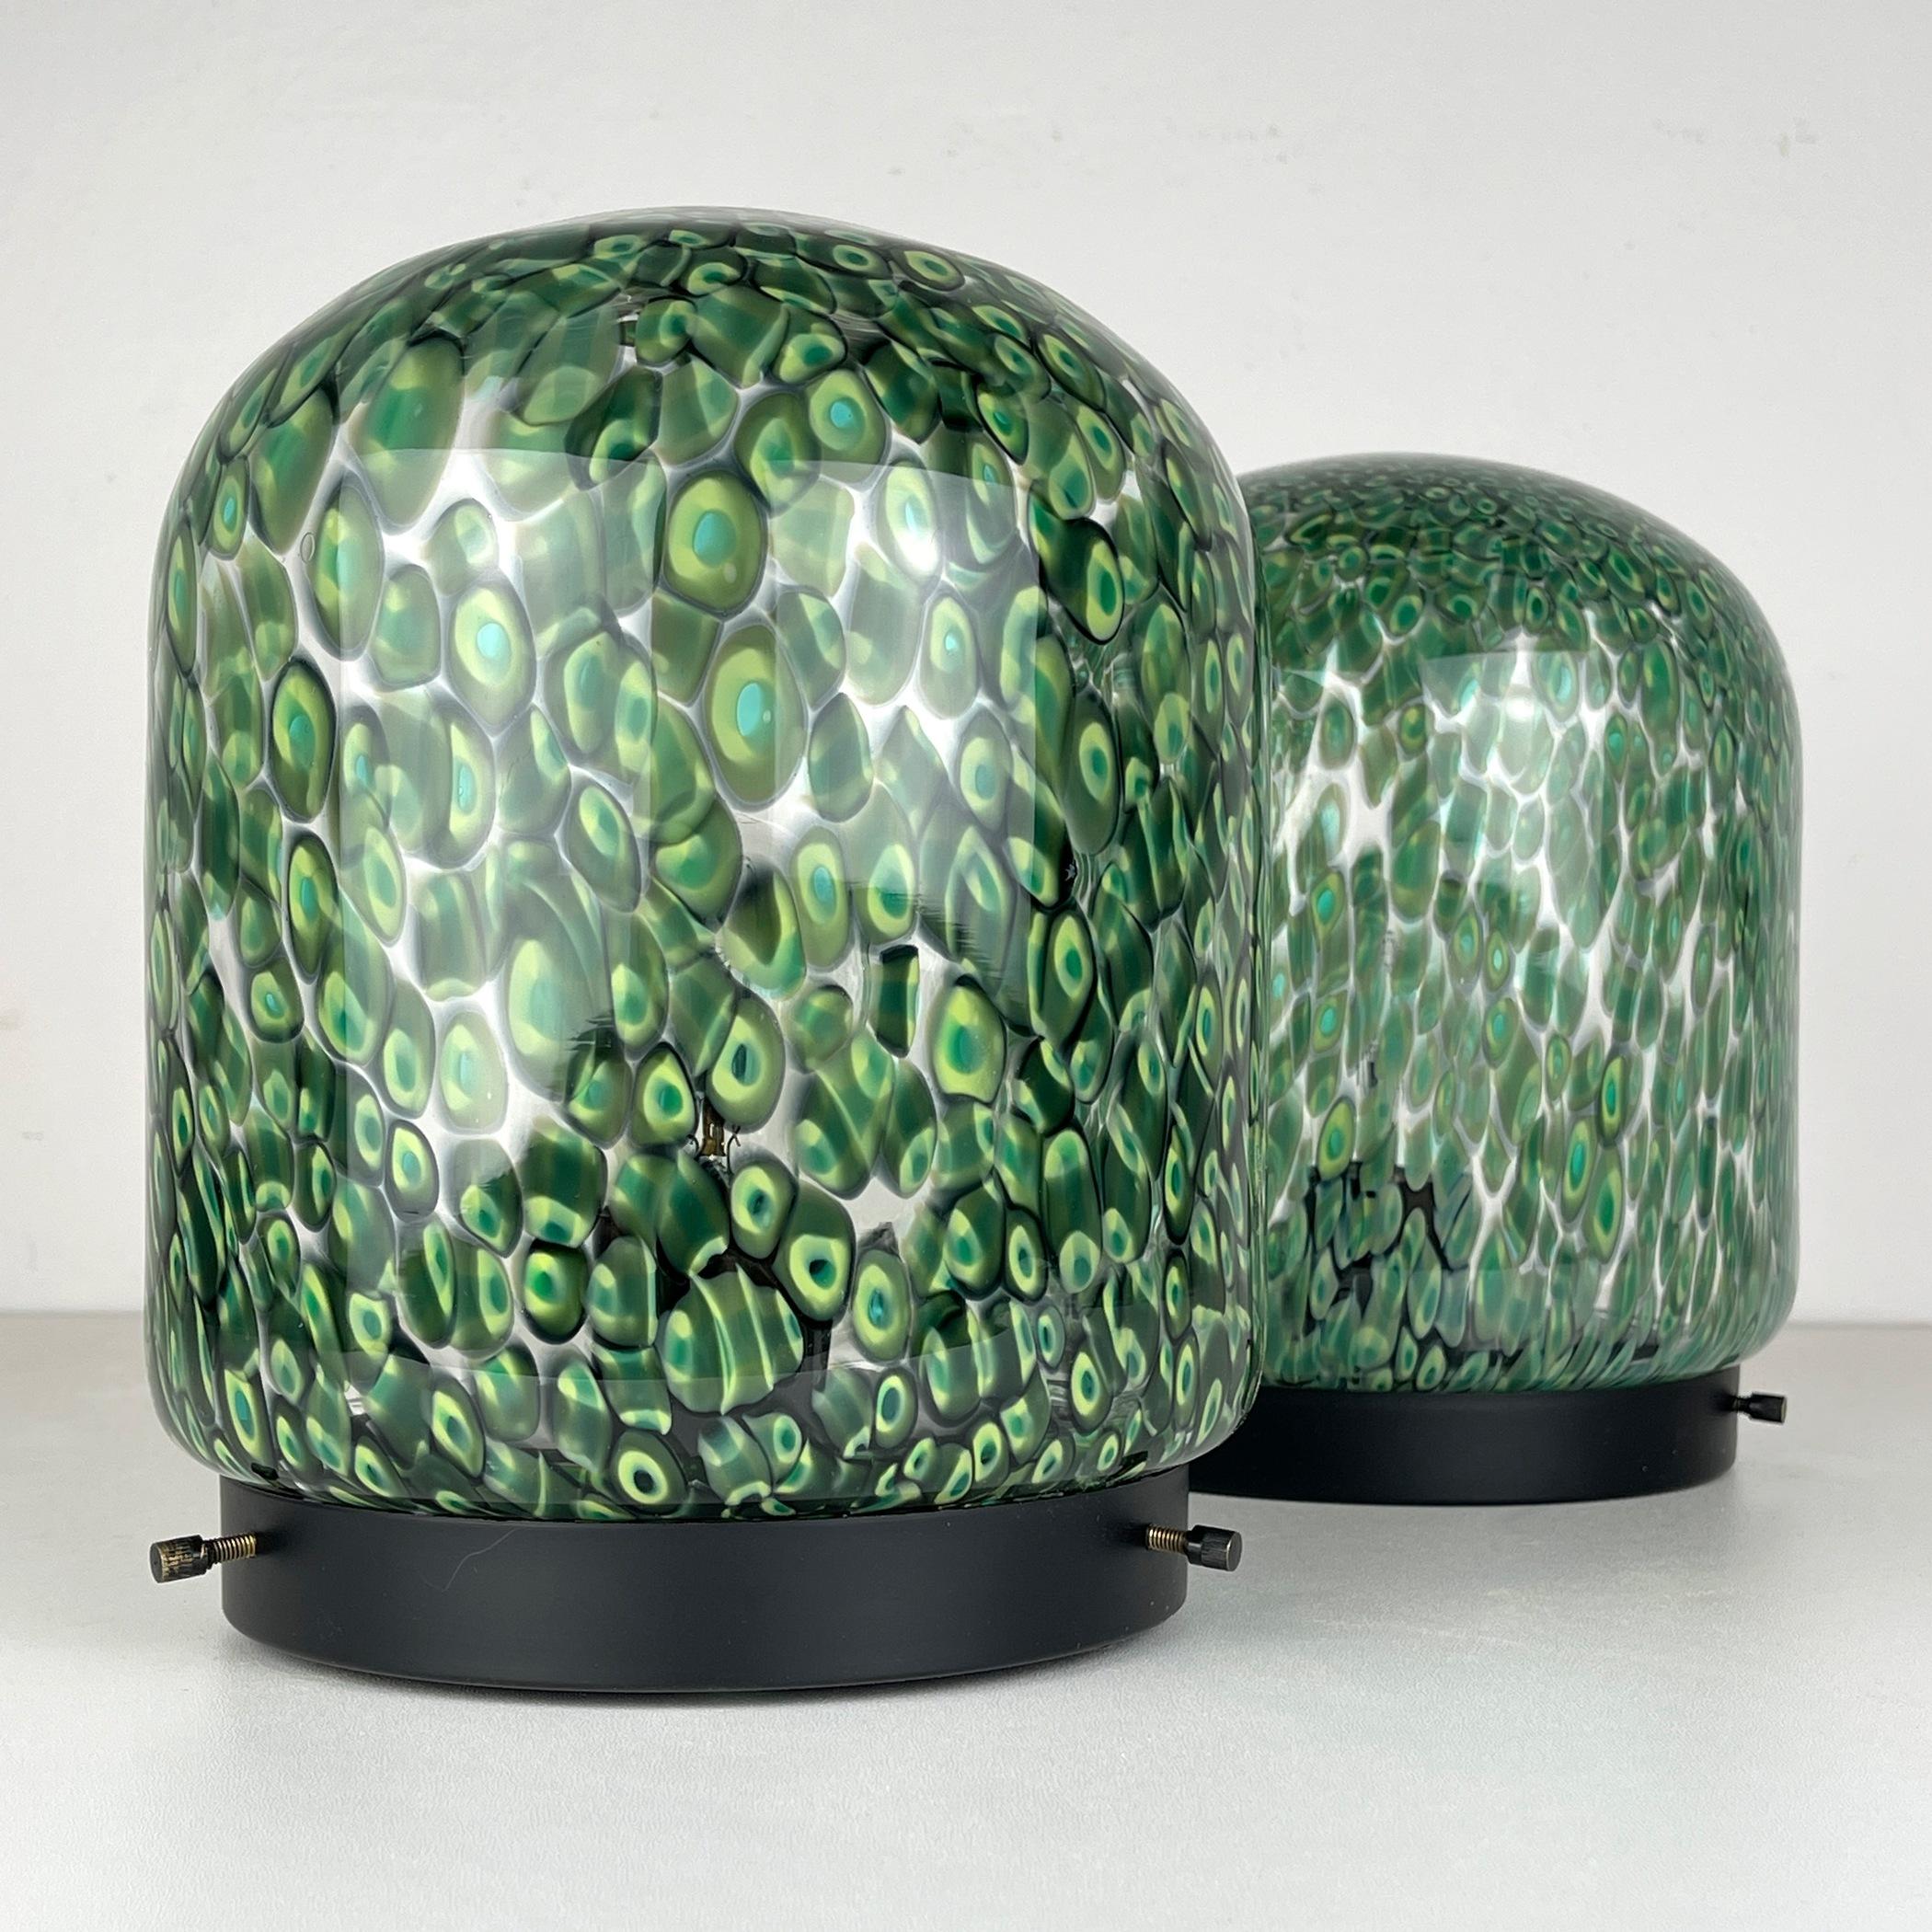 Revitalize your space with this exquisite pair of green table lamps, designed by Gae Aulenti for Vistosi in Italy during the 1970s. These stylish table lamps are a true blend of craftsmanship and design. Handcrafted, the lampshades are a genuine